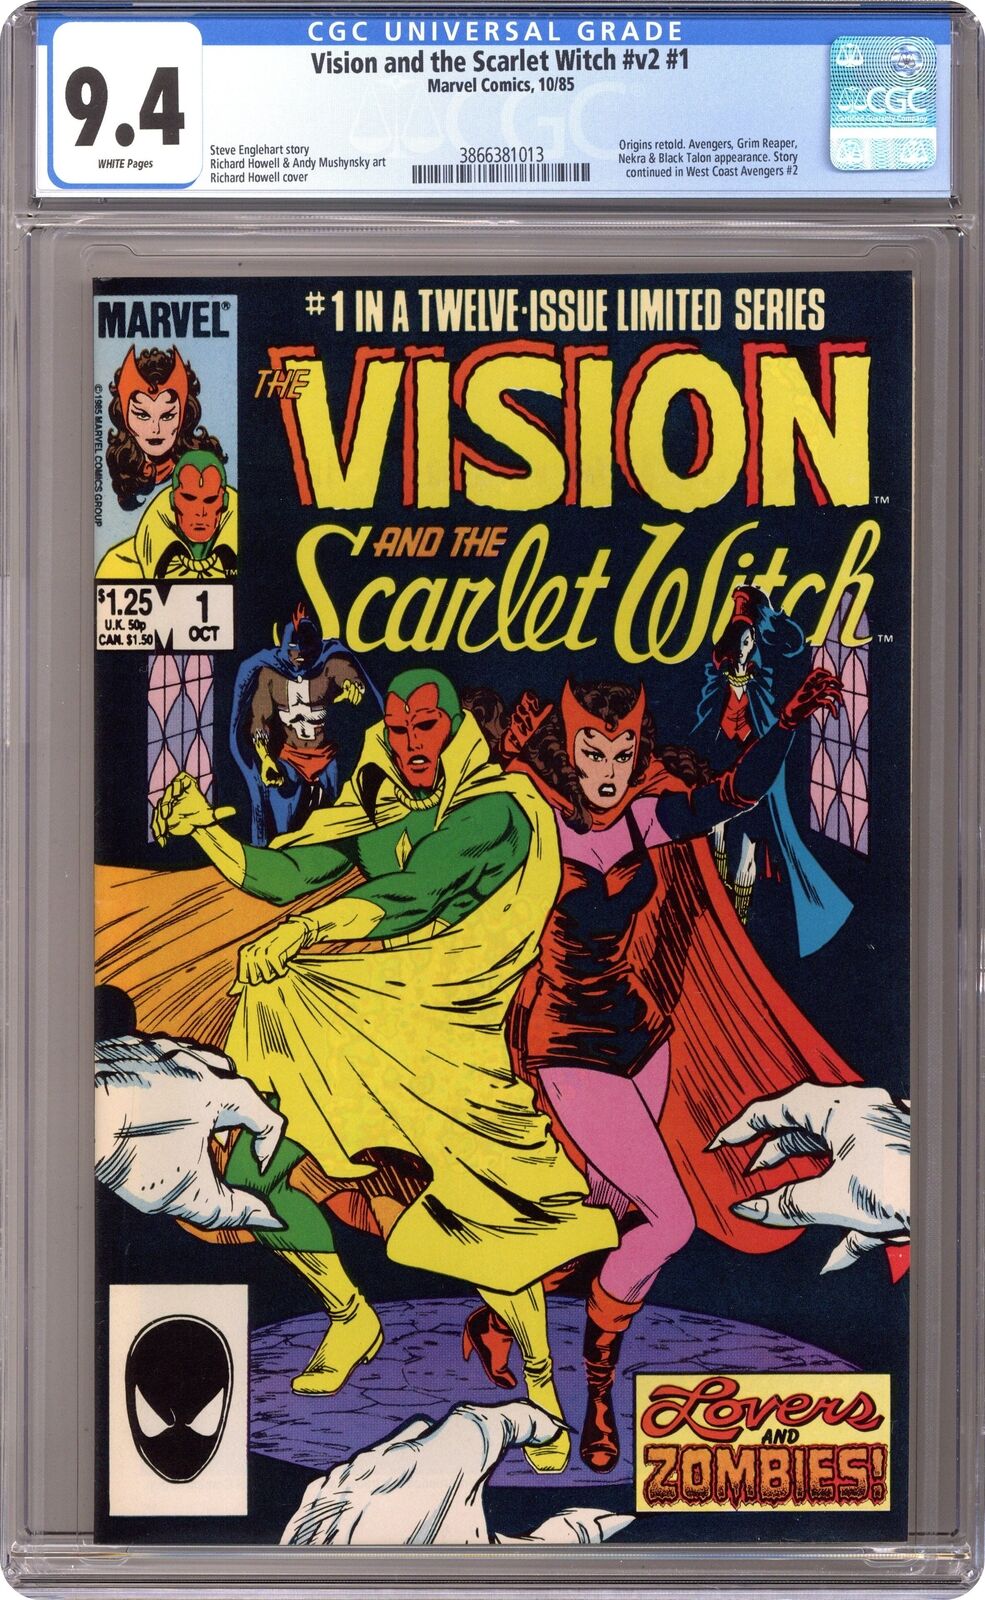 Vision and the Scarlet Witch #1 CGC 9.4 1985 3866381013